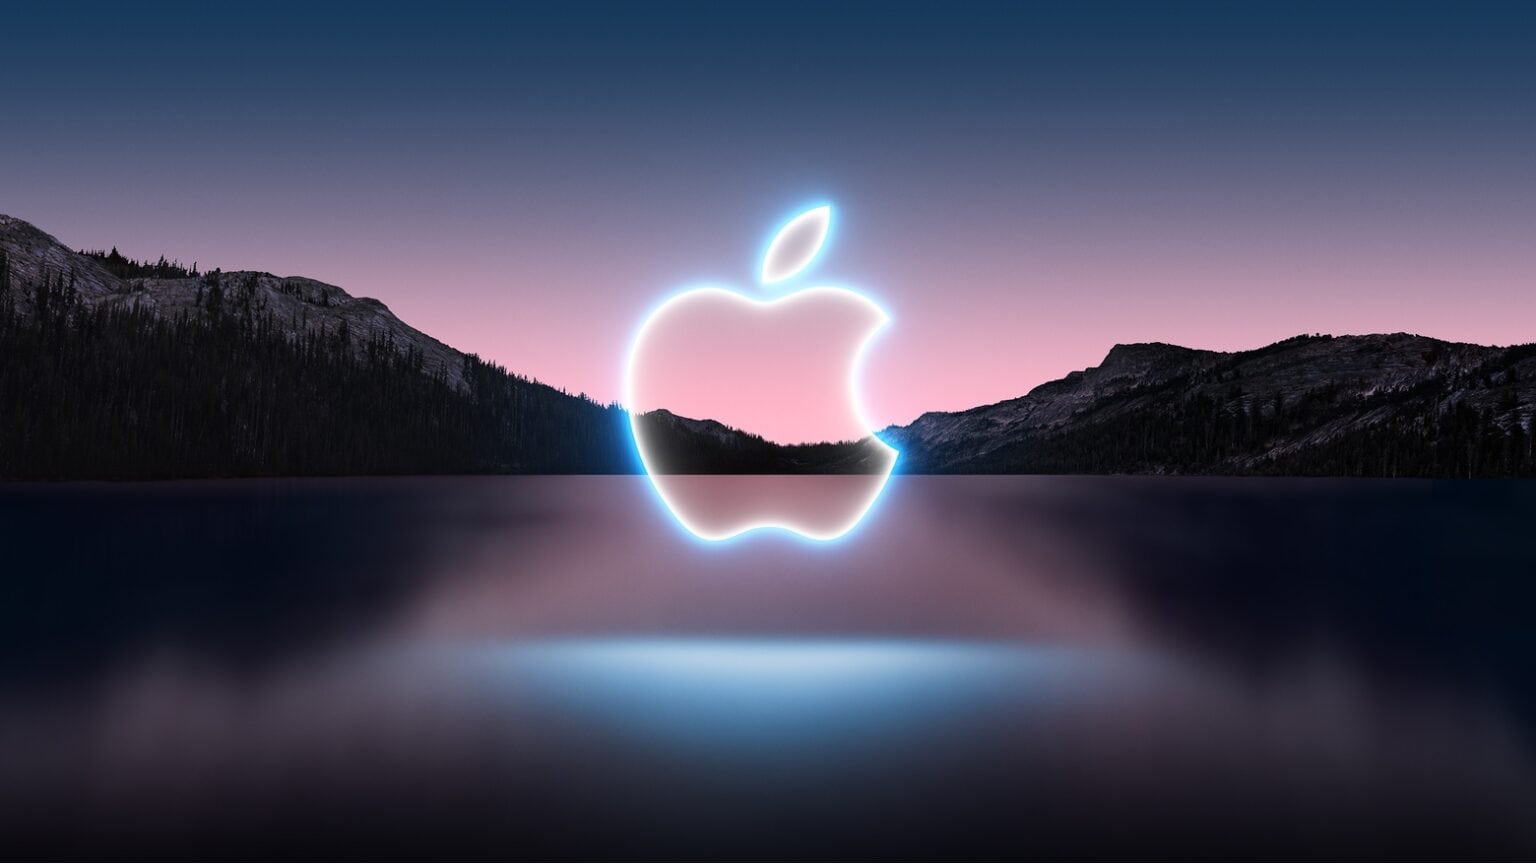 Apple’s 'California streaming' event invite hints at iPhone 13 features